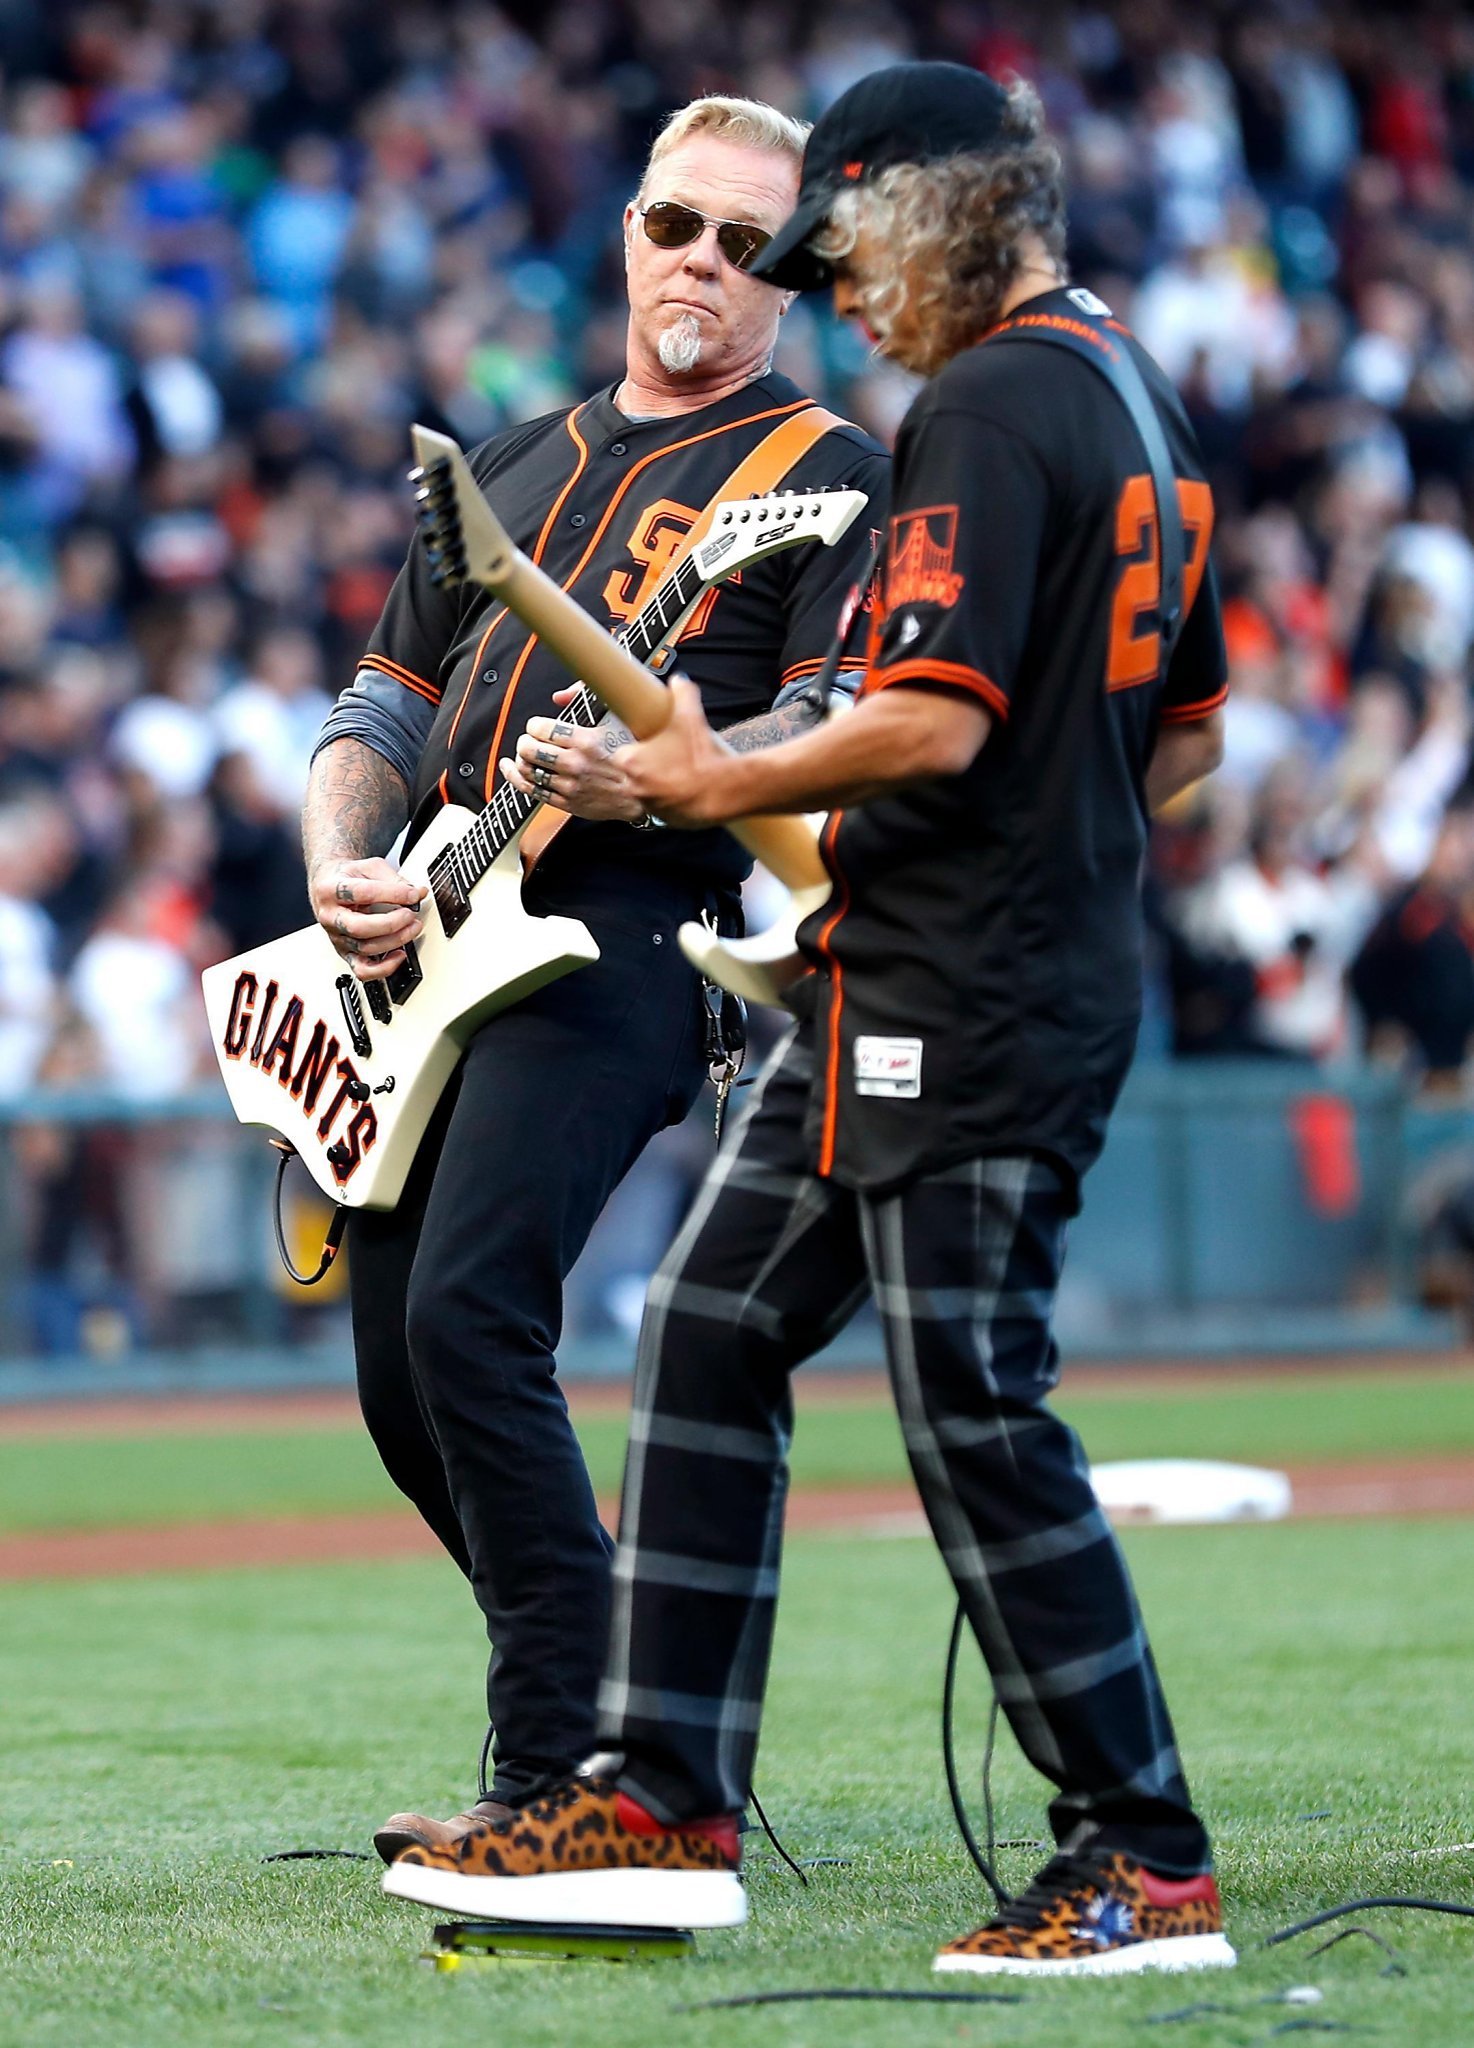 Marvel, Bruce Lee, Hello Kitty and Metallica: Here are the SF Giants' theme  nights for this season